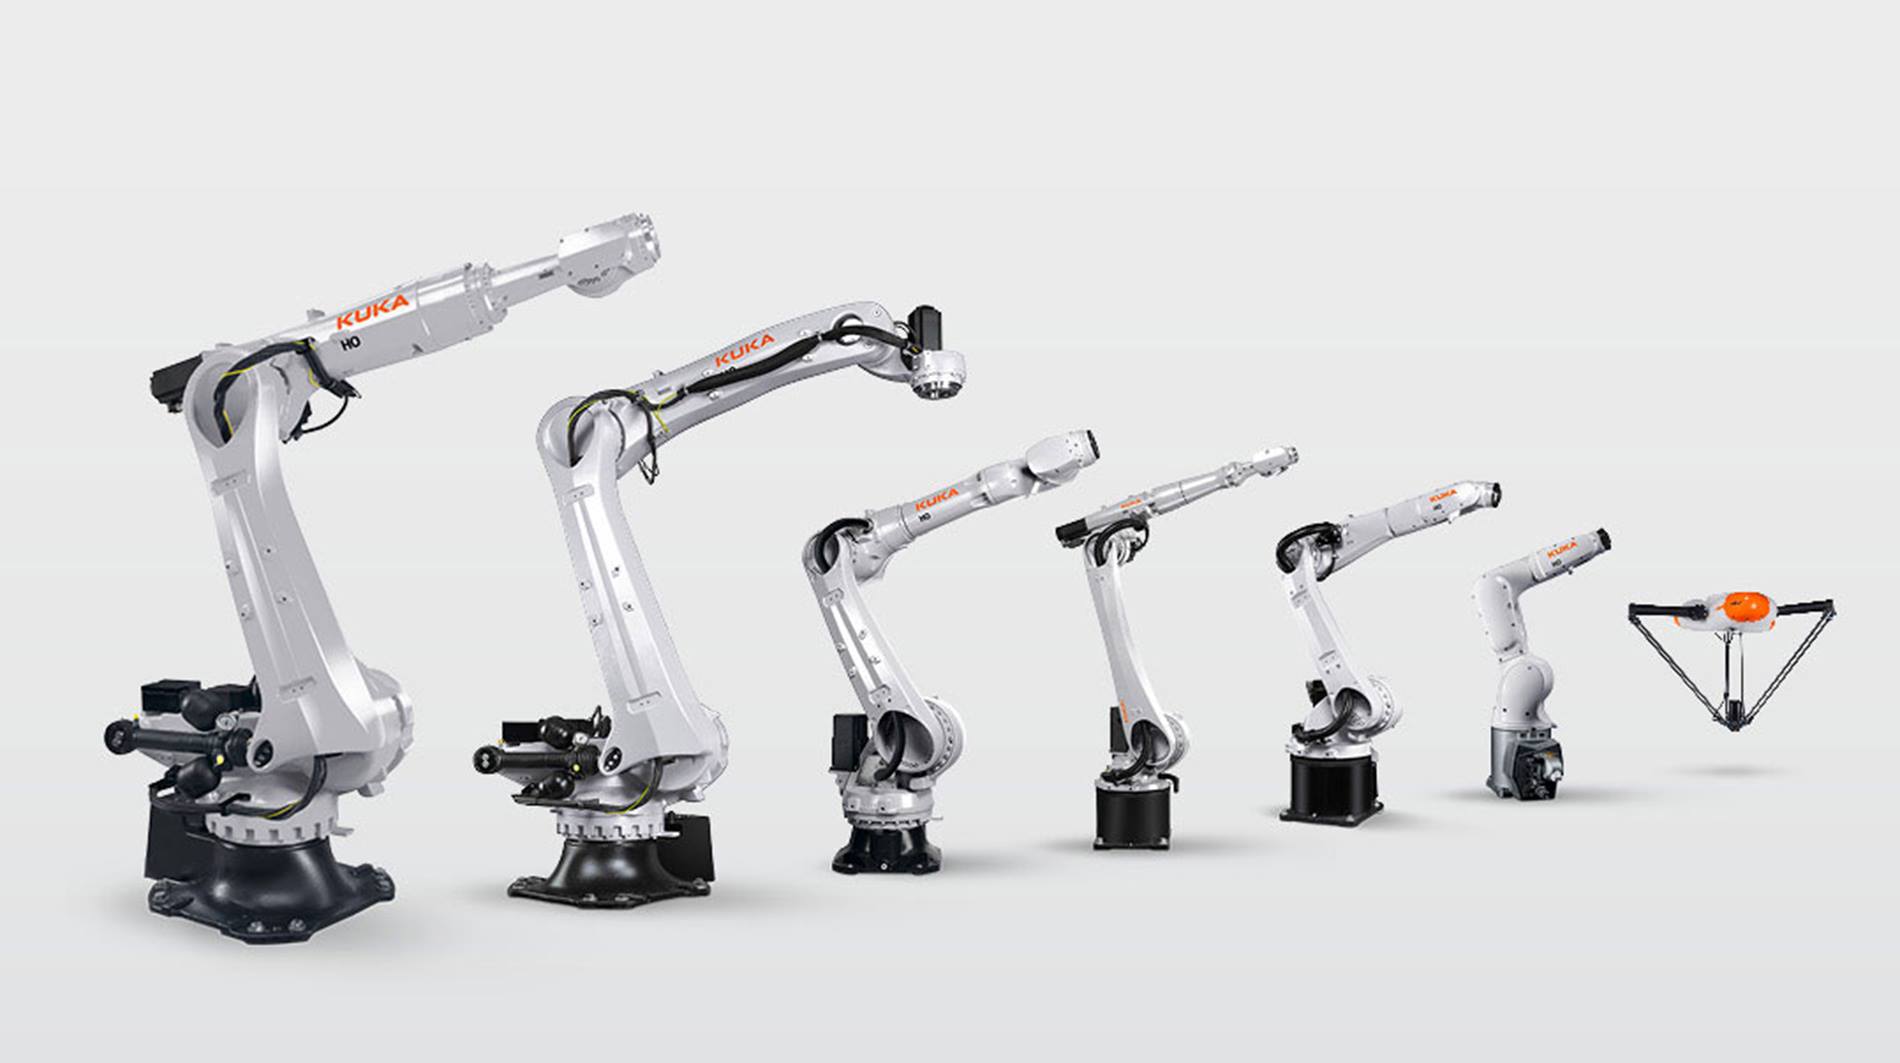 Hygiene meets robotics: The HO portfolio uses H1 lubricants in all axes